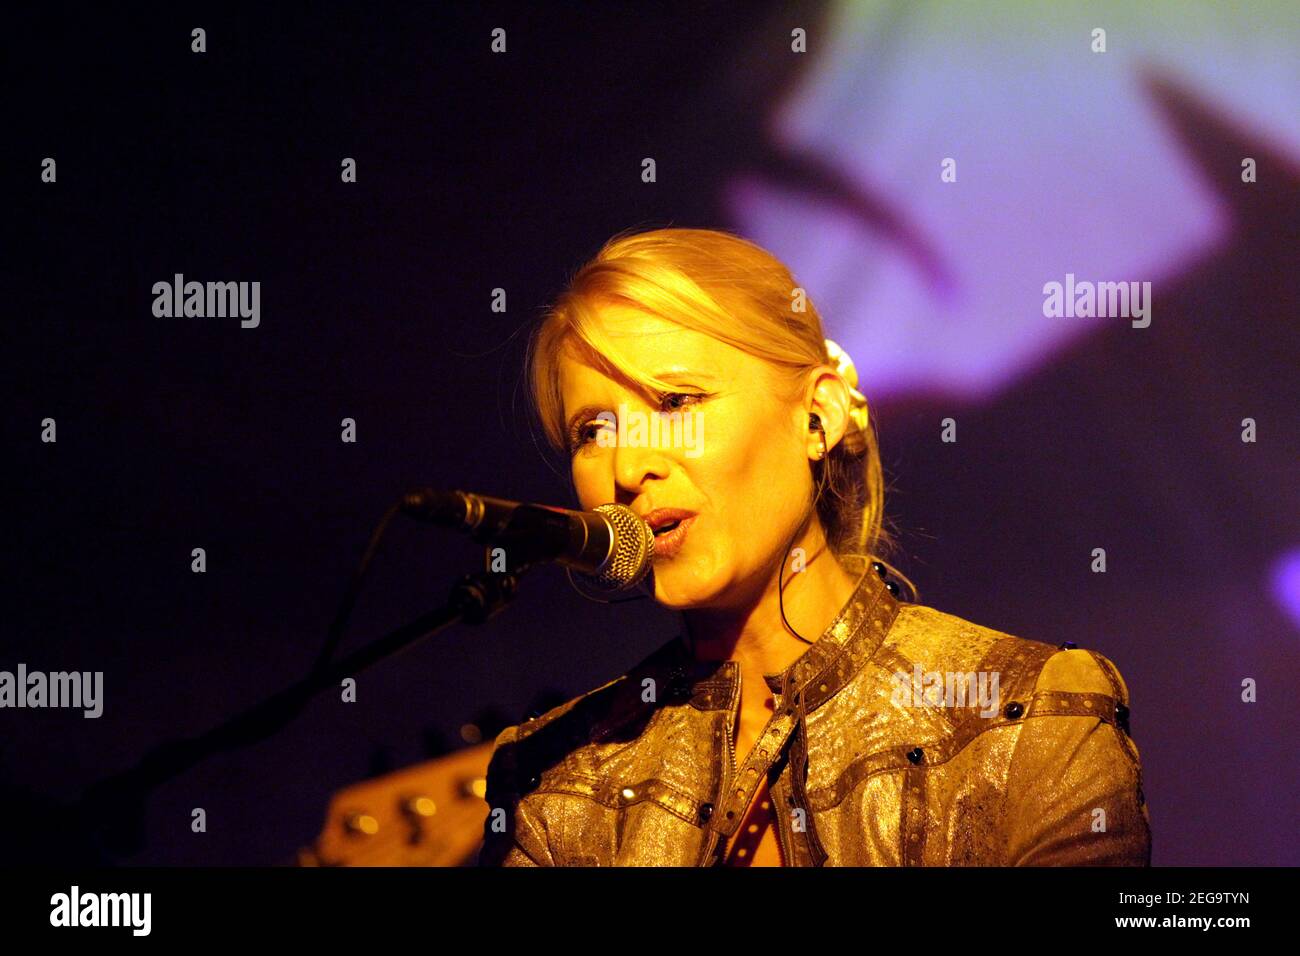 Female singer performing live at an indoor concert Stock Photo